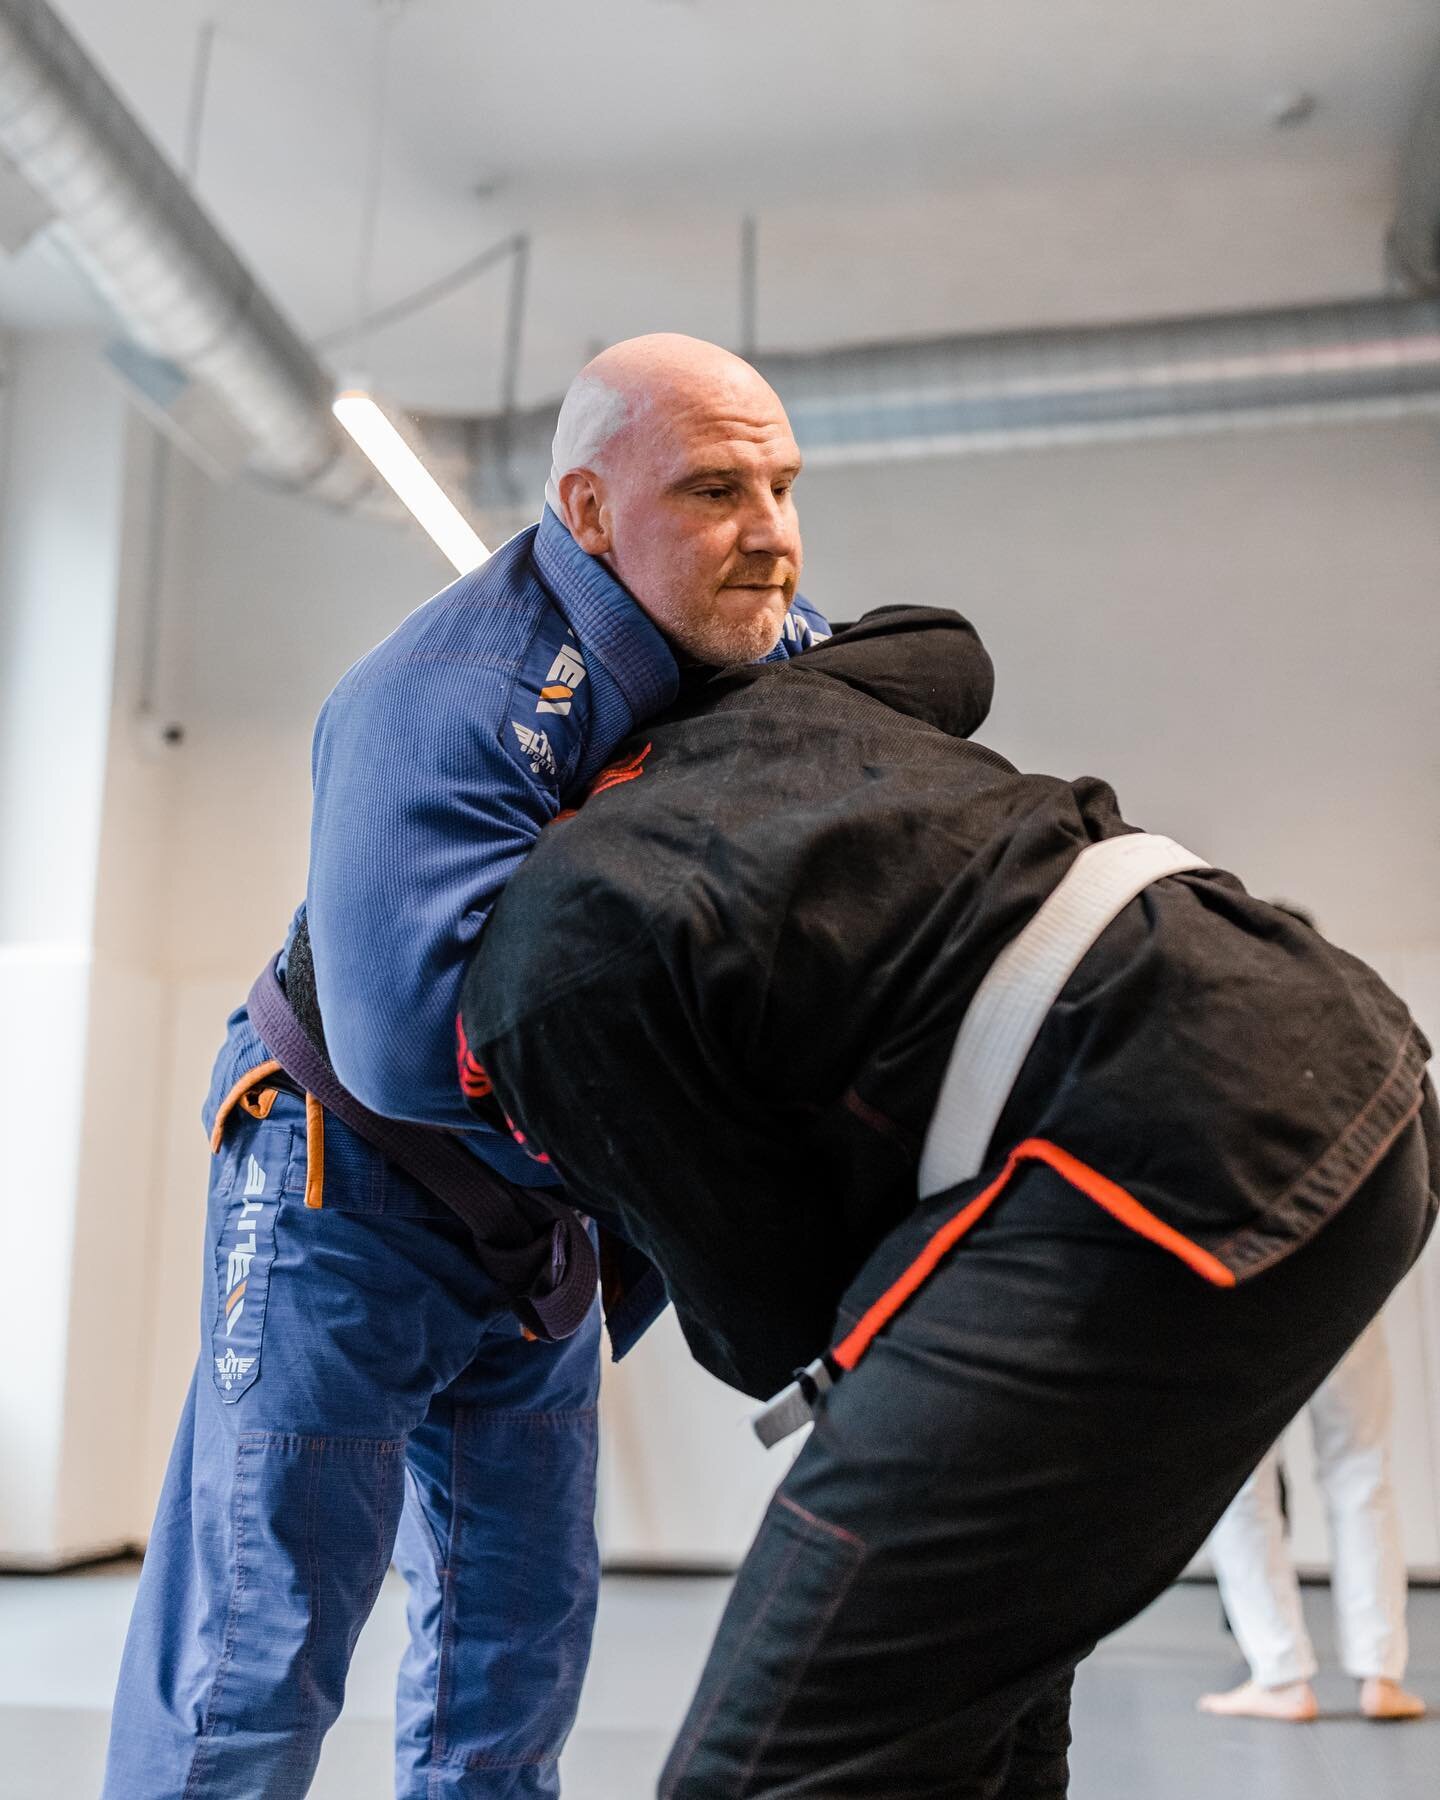 Jiu jitsu teaches you how to focus. How to get more accomplished with less effort. You start to see how the art advances your potential as a human being.